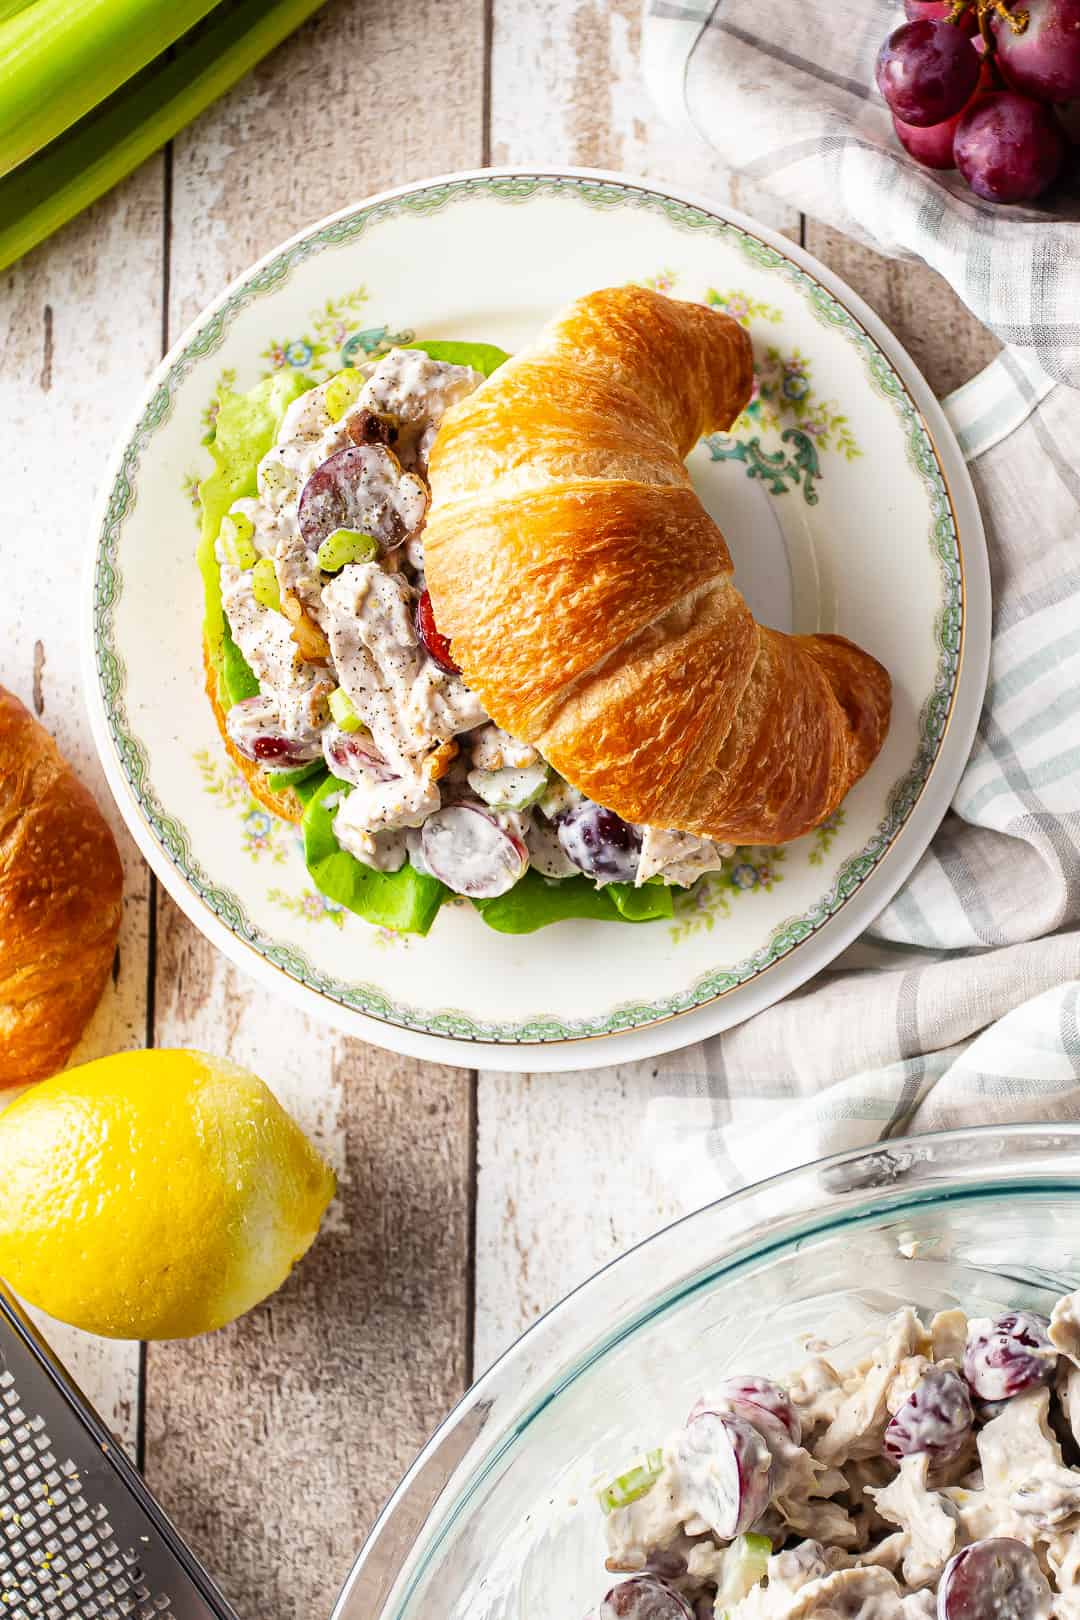 Chicken salad recipes prepared and served as a sandwich.